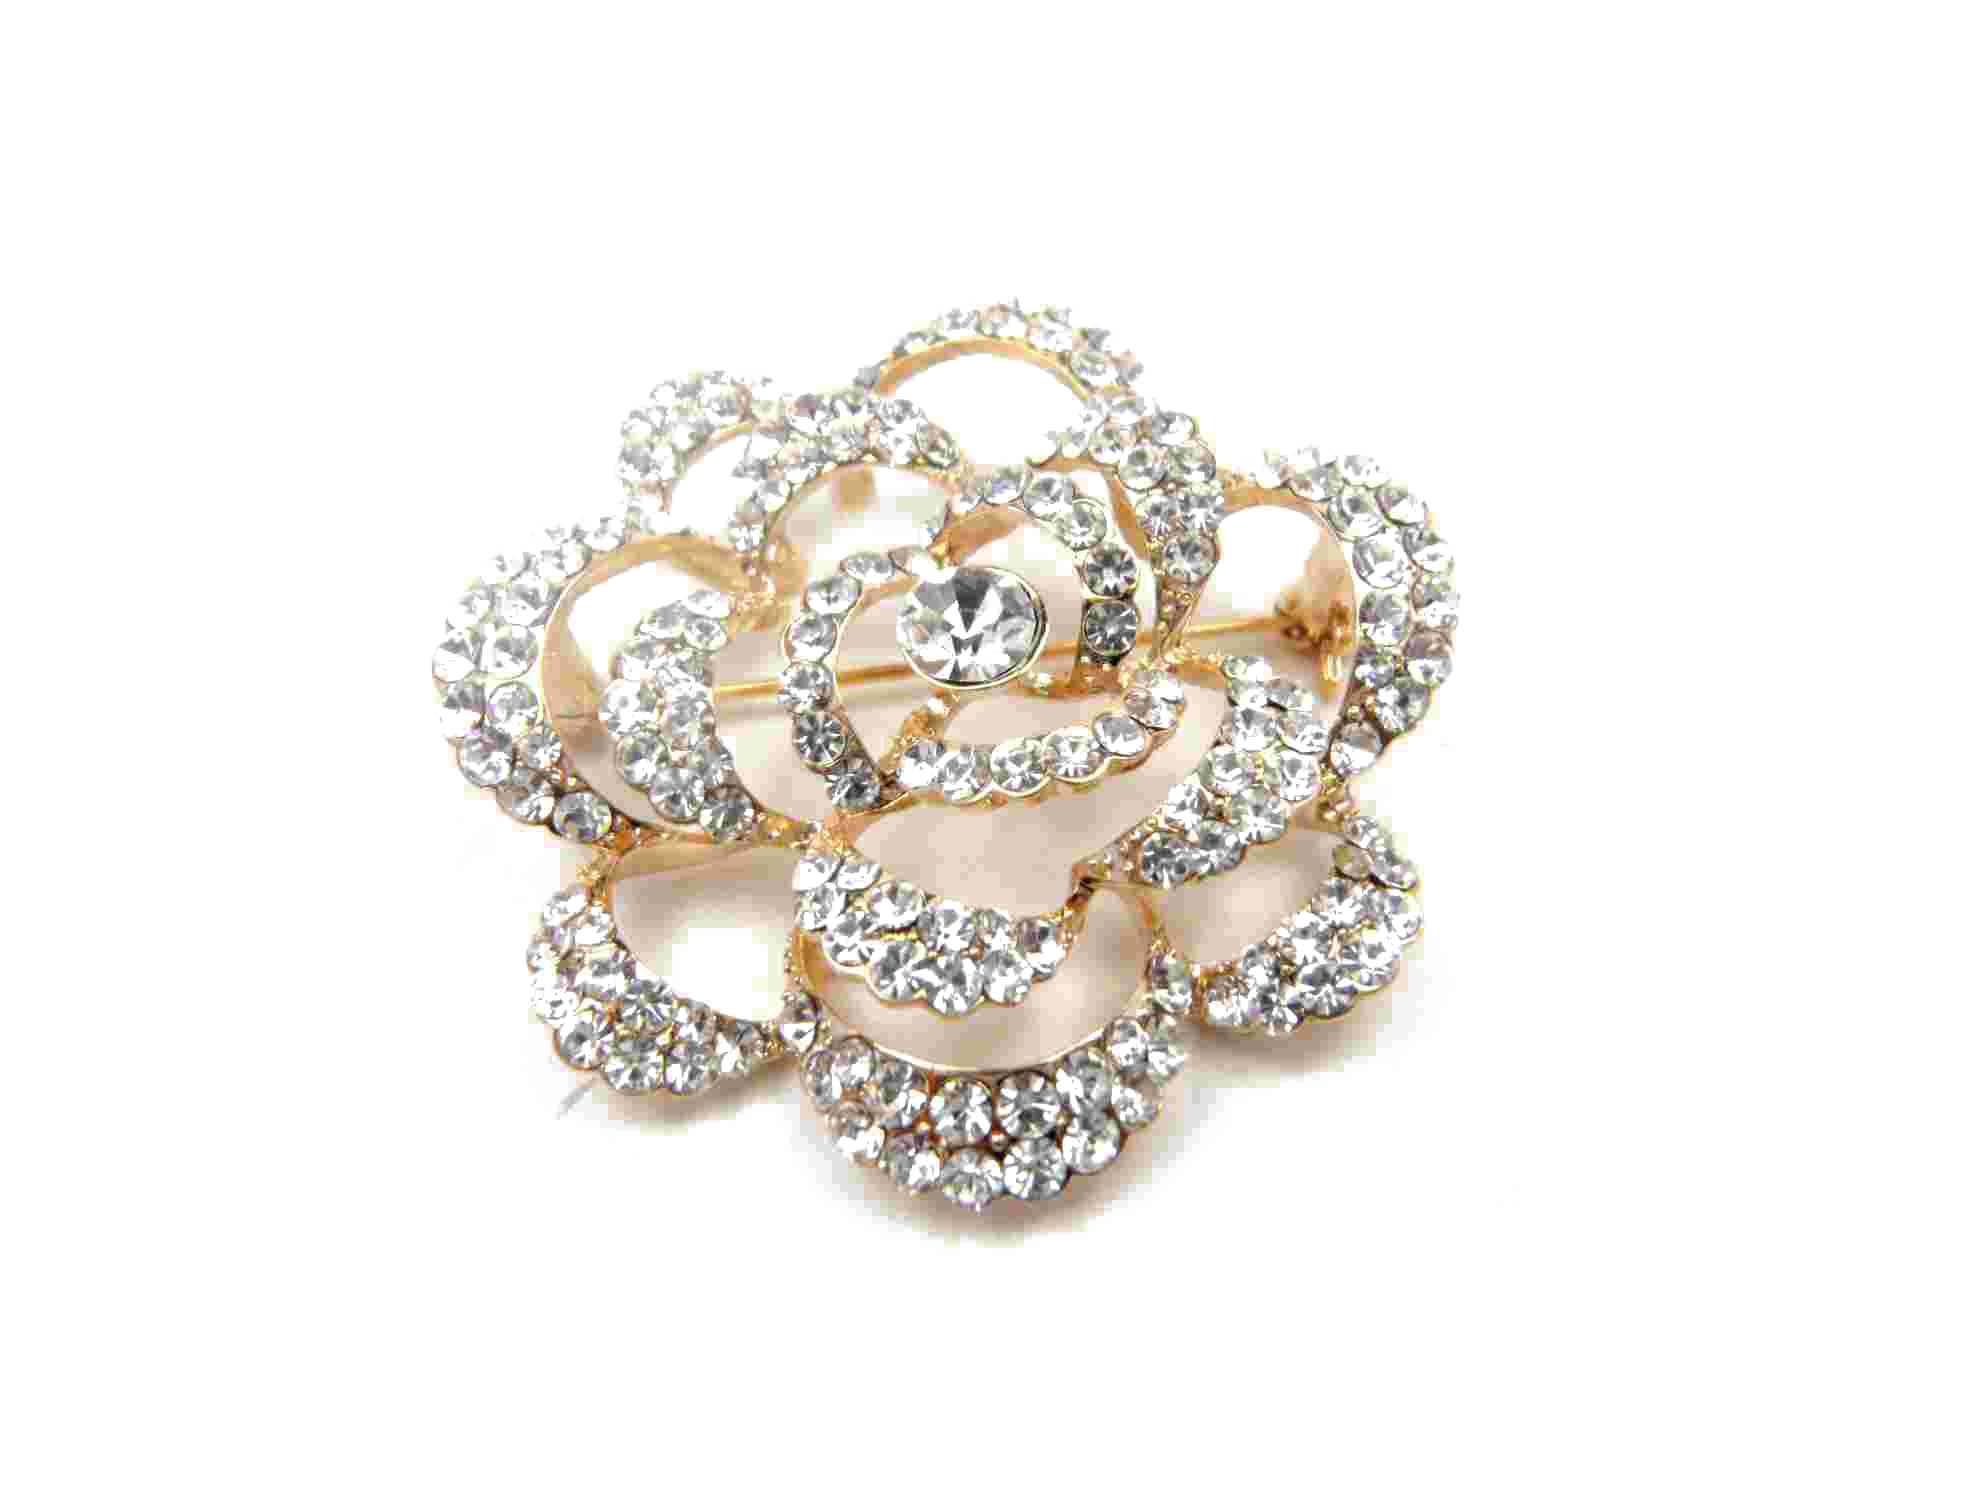 Fashionable flower brooch, made of zinc alloy and glass, available in various designs 